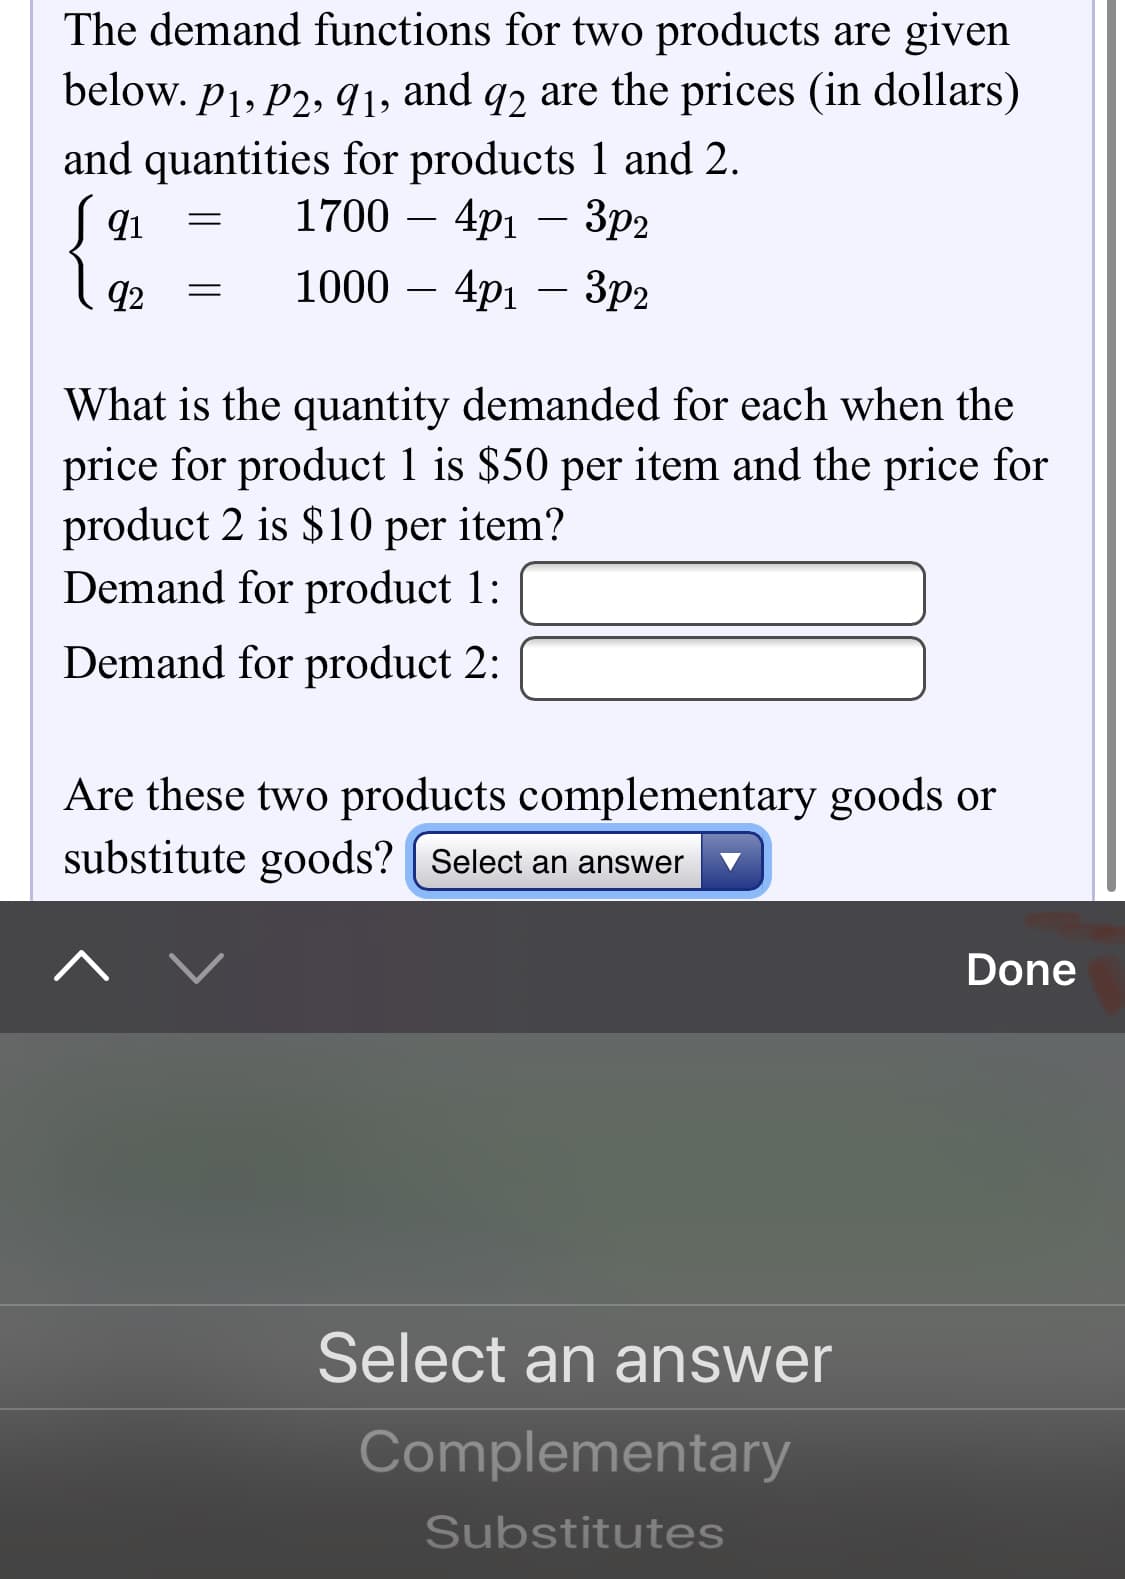 The demand functions for two products are given
below. p1, P2, 91, and q2 are the prices (in dollars)
and quantities for products 1 and 2.
1700 –
4pi – 3p2
92
1000 –
· 4p1 – 3p2
What is the quantity demanded for each when the
price for product 1 is $50 per item and the price for
product 2 is $10 per item?
Demand for product 1:
Demand for product 2:
Are these two products complementary goods or
substitute goods? | Select an answer
